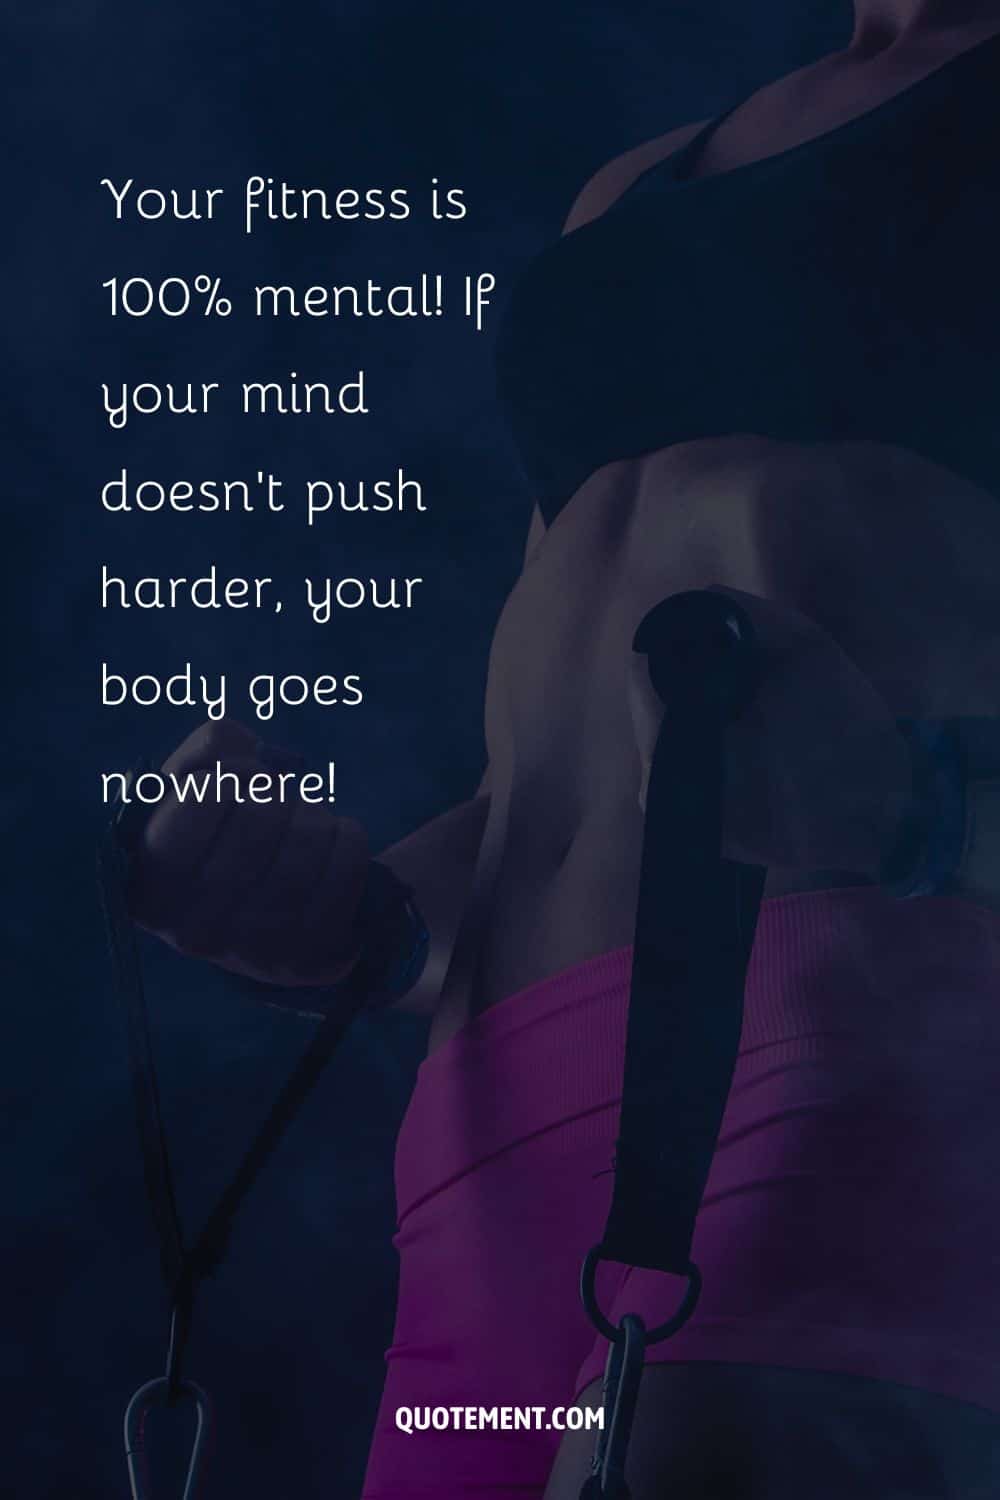 Your fitness is 100% mental!